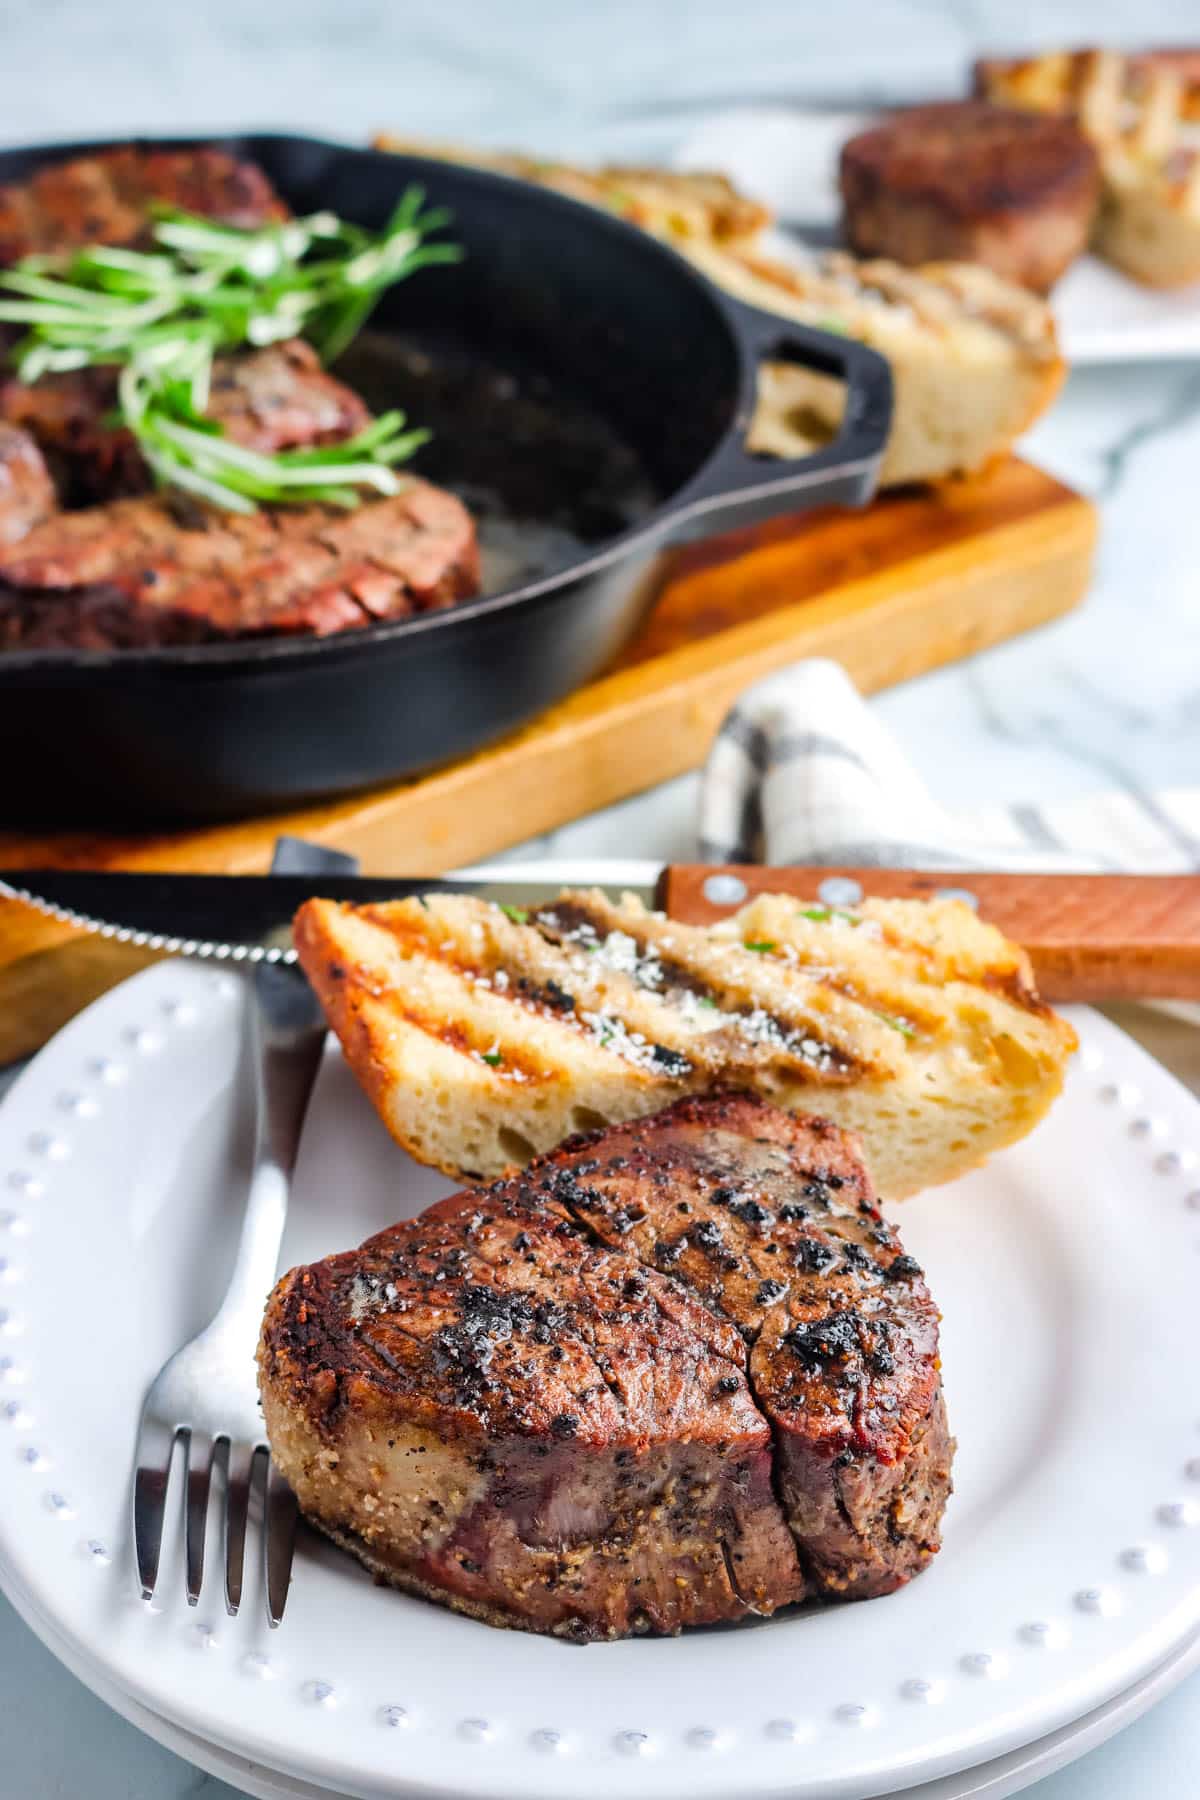 A smoked filet mignon on a white plate with garlic bread.